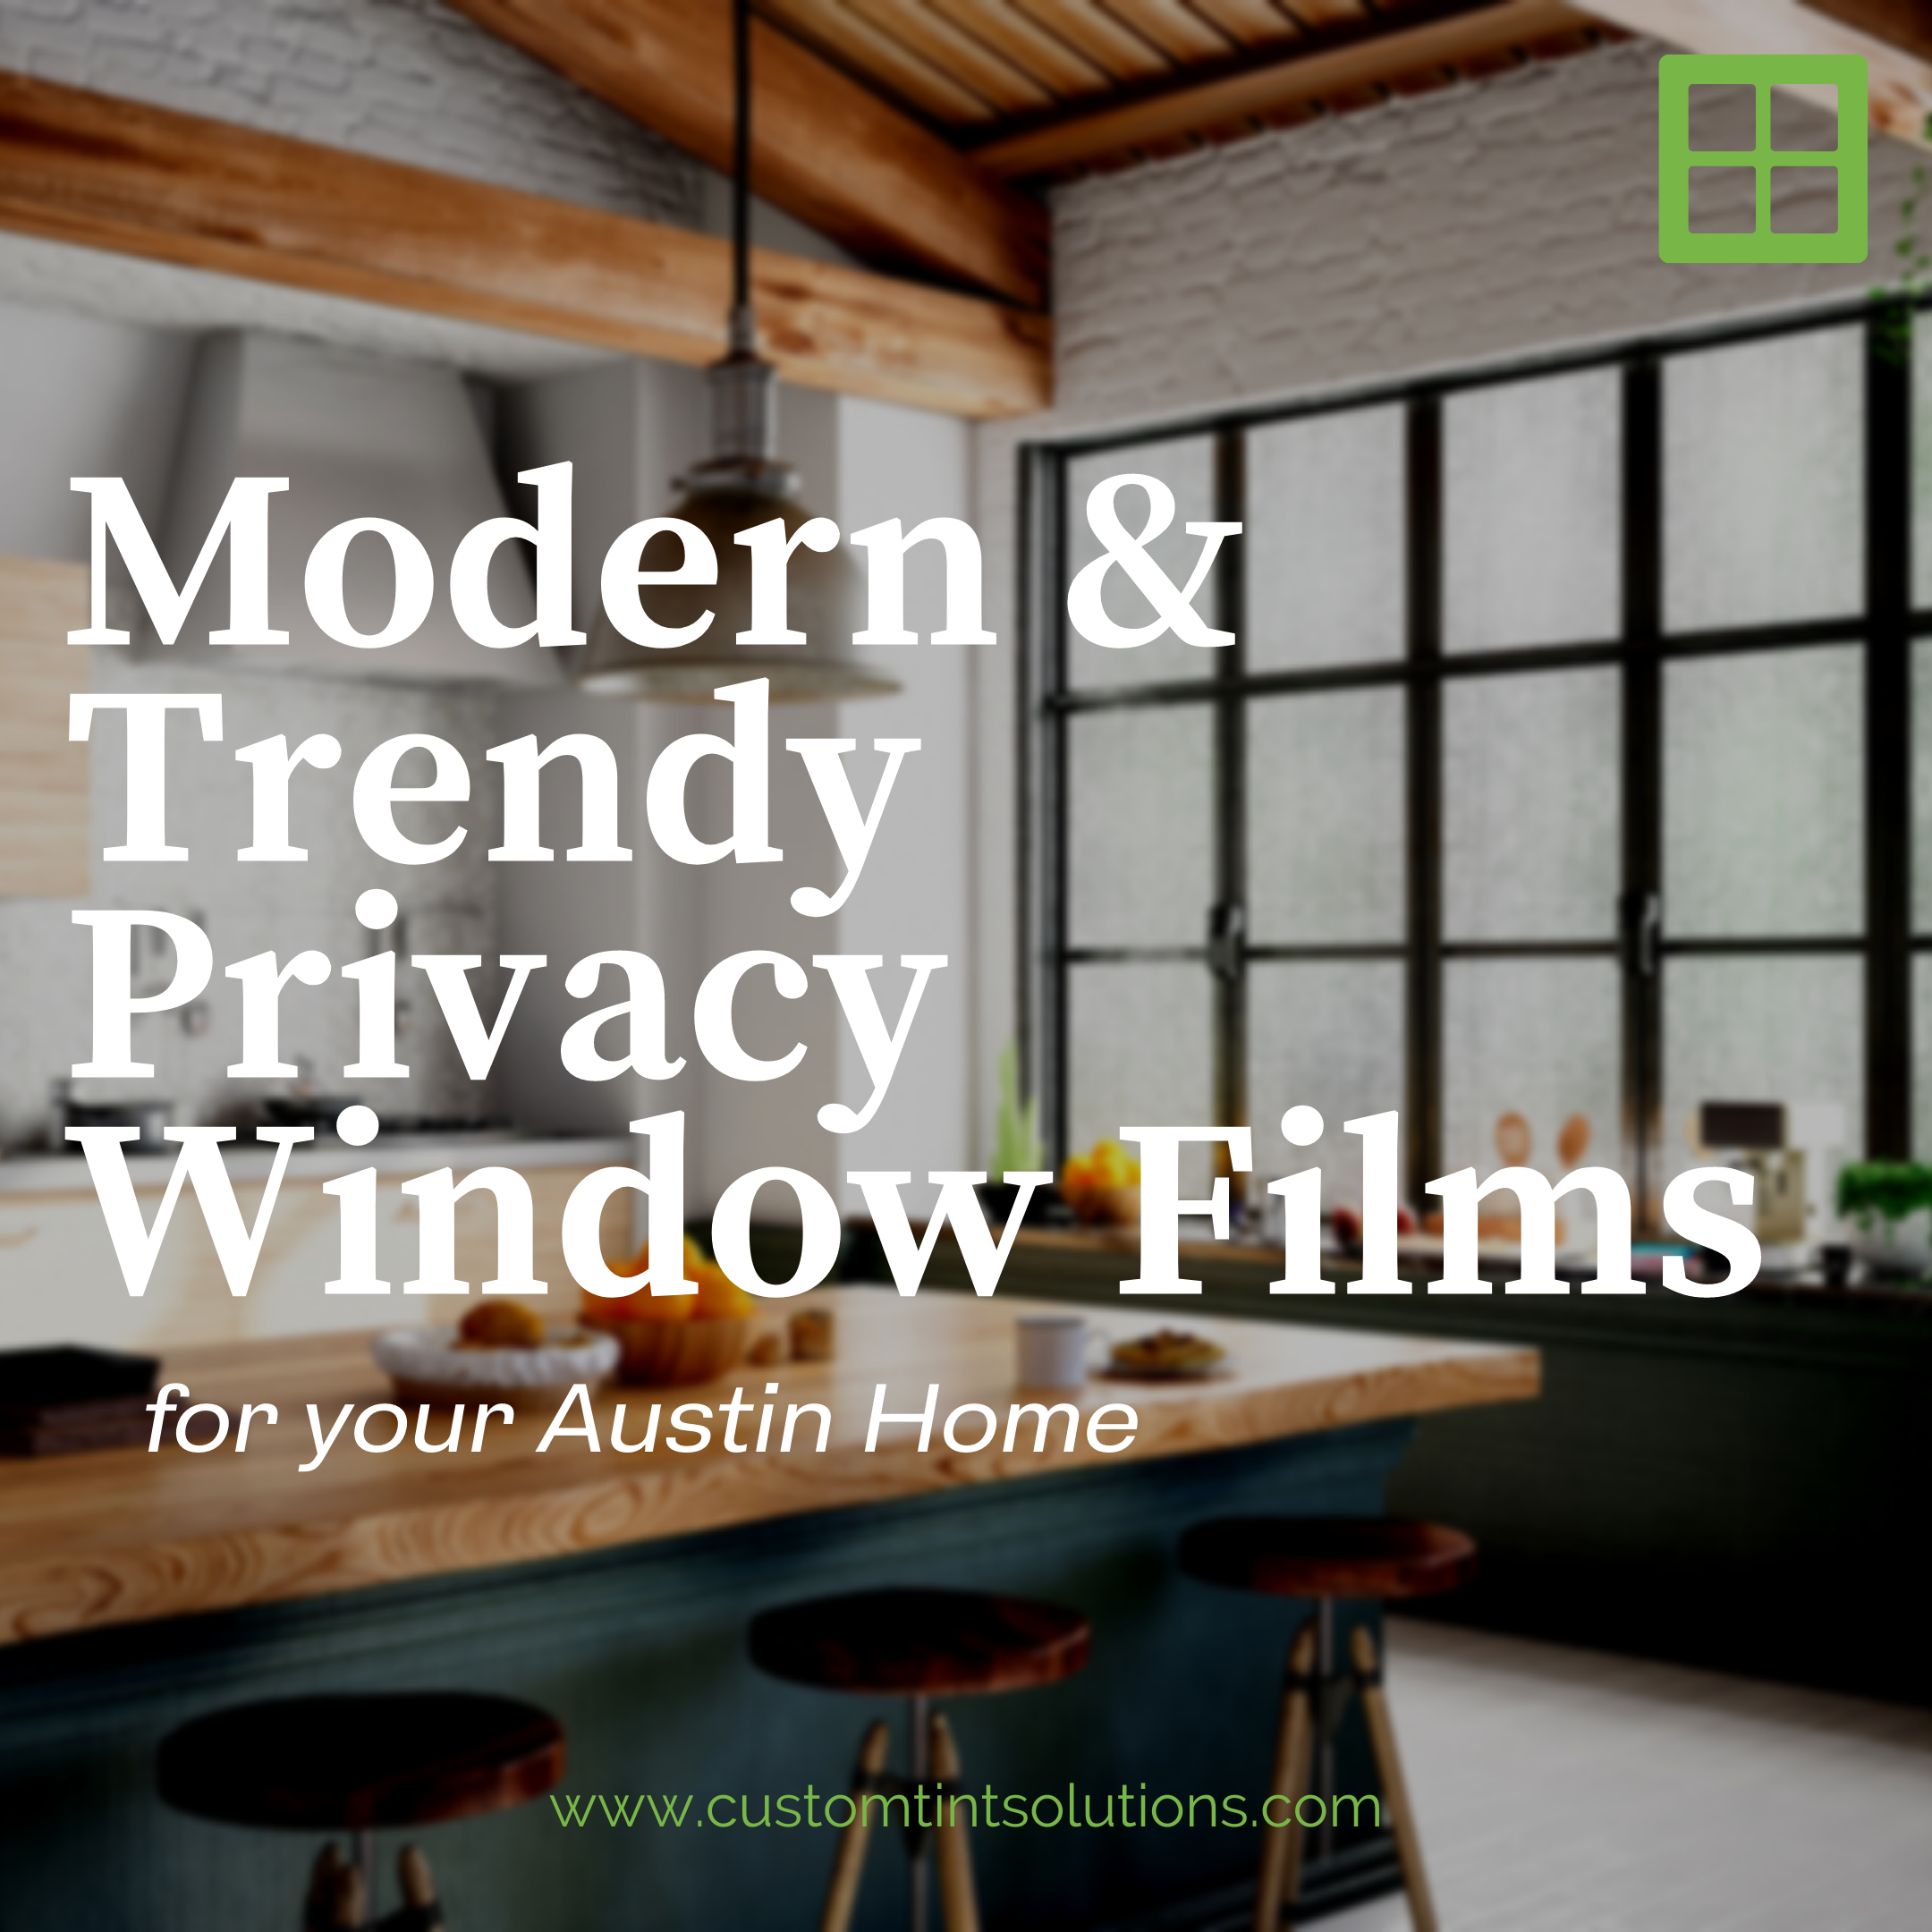 Modern & Trendy Privacy Window Films for your Austin Home - Custom Tint  Solutions